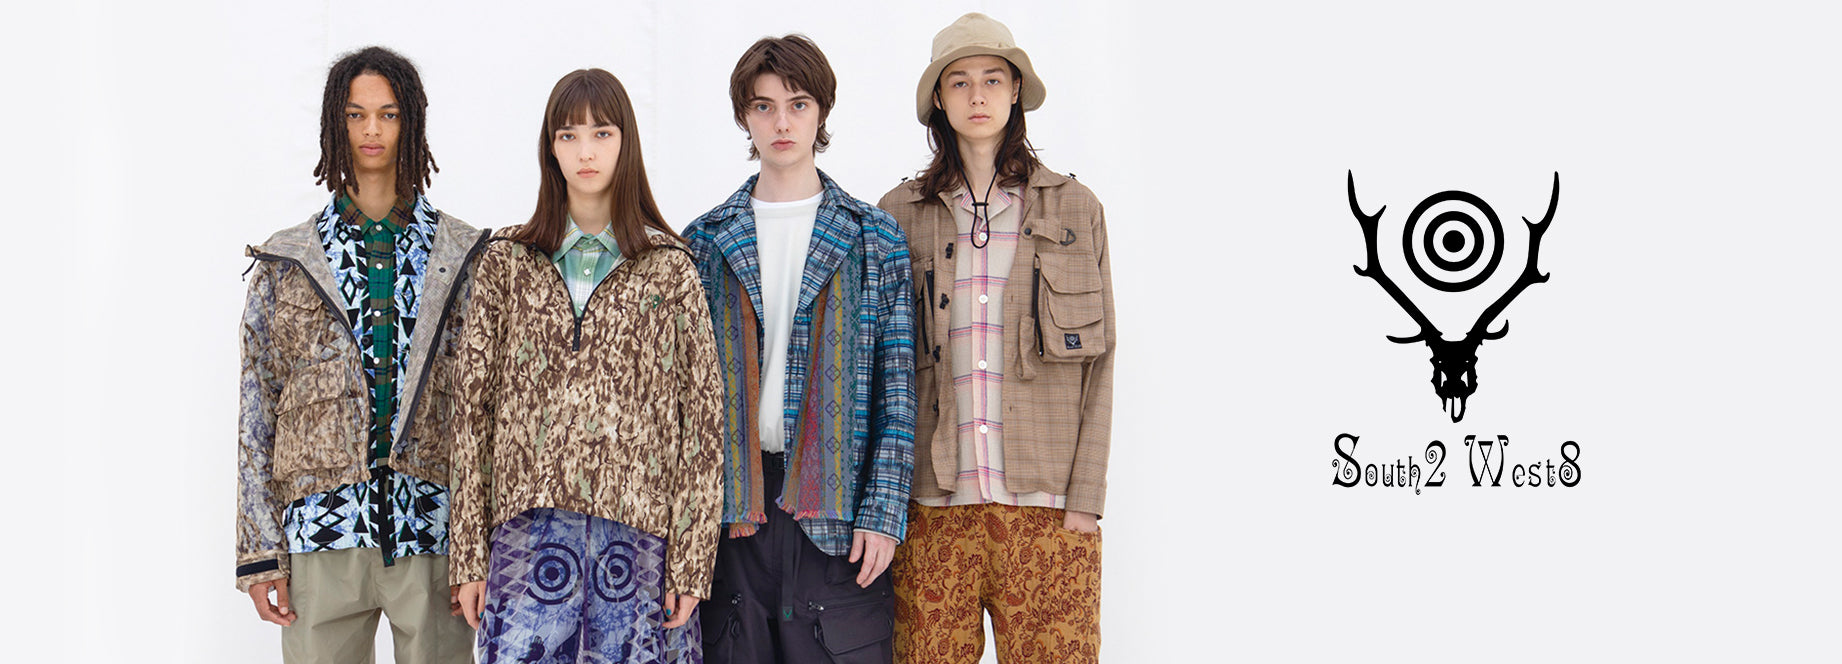 South2 West8 Spring/Summer 24 Collection